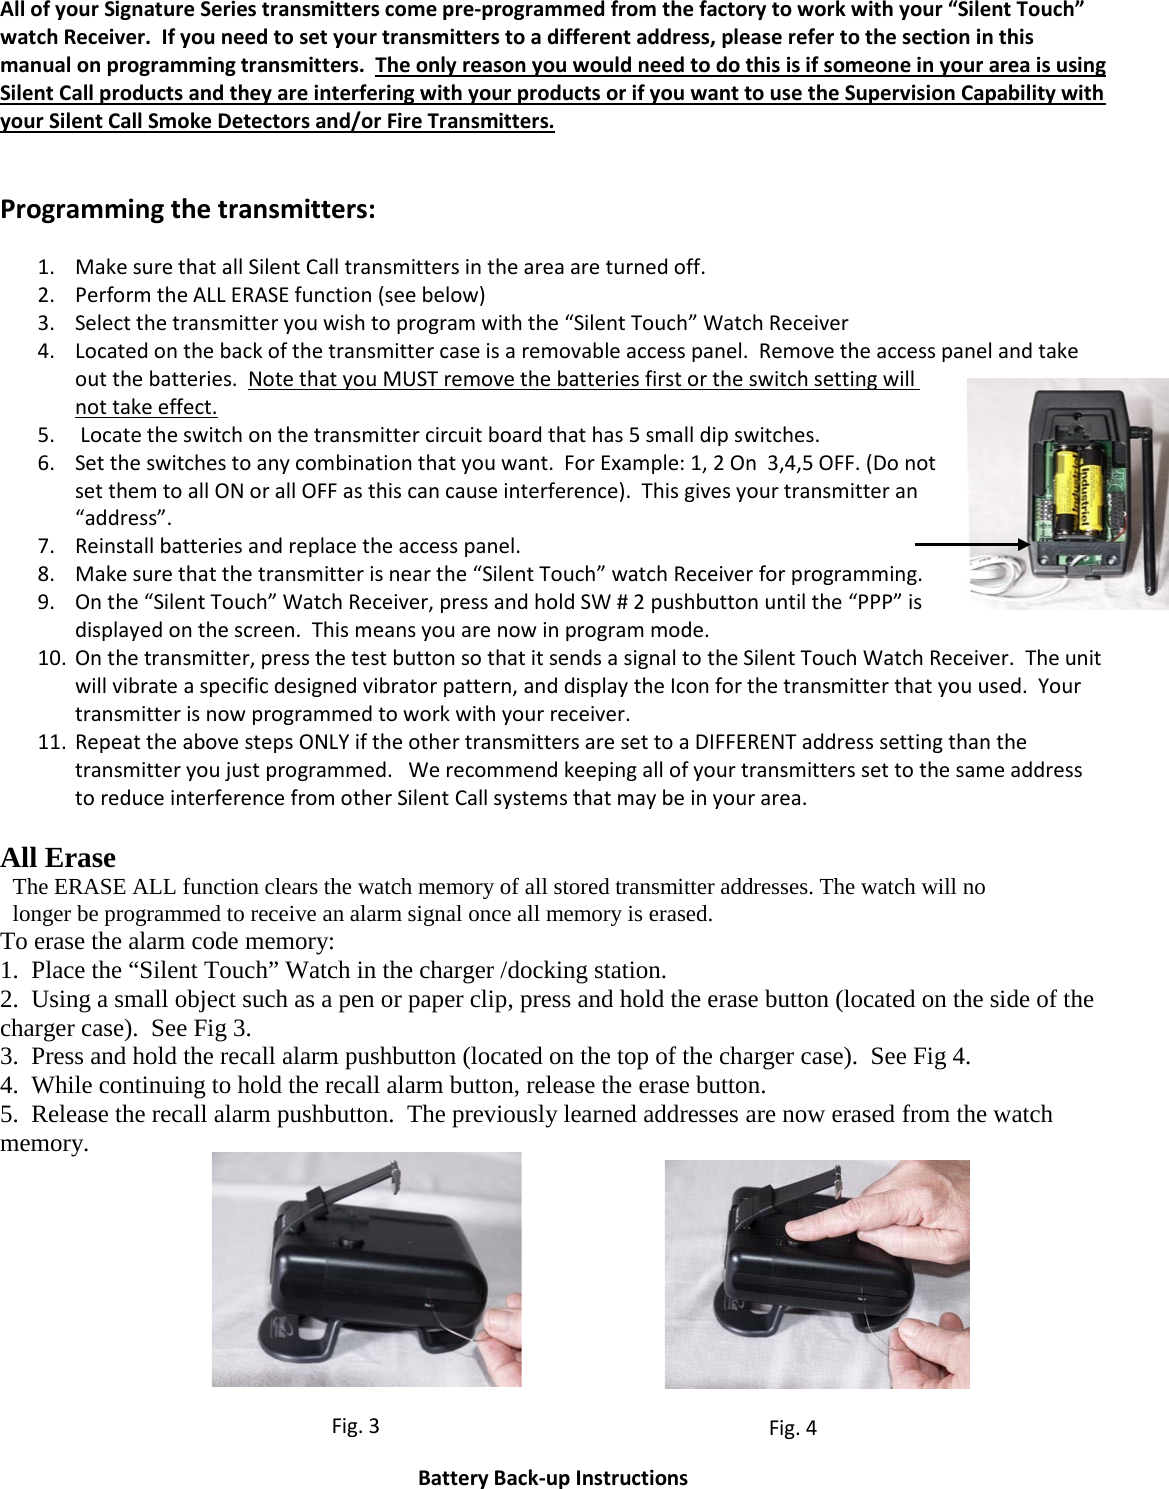 All of your Signature Series transmitters come pre-programmed from the factory to work with your “Silent Touch” watch Receiver.  If you need to set your transmitters to a different address, please refer to the section in this manual on programming transmitters.  The only reason you would need to do this is if someone in your area is using Silent Call products and they are interfering with your products or if you want to use the Supervision Capability with your Silent Call Smoke Detectors and/or Fire Transmitters.   Programming the transmitters: 1. Make sure that all Silent Call transmitters in the area are turned off.        2. Perform the ALL ERASE function (see below) 3. Select the transmitter you wish to program with the “Silent Touch” Watch Receiver 4. Located on the back of the transmitter case is a removable access panel.  Remove the access panel and take out the batteries.  Note that you MUST remove the batteries first or the switch setting will not take effect. 5.  Locate the switch on the transmitter circuit board that has 5 small dip switches.   6. Set the switches to any combination that you want.  For Example: 1, 2 On  3,4,5 OFF. (Do not set them to all ON or all OFF as this can cause interference).  This gives your transmitter an “address”.  7. Reinstall batteries and replace the access panel. 8. Make sure that the transmitter is near the “Silent Touch” w atch Receiver for programming.  9. On the “Silent Touch” Watch Receiver, press and hold SW # 2 pushbutton until the “PPP” is displayed on the screen.  This means you are now in program mode. 10. On the transmitter, press the test button so that it sends a signal to the Silent Touch Watch Receiver.  T h e   u n i t  will vibrate a specific designed vibrator pattern, and display the Icon for the transmitter that you used.  Your transmitter is now programmed to work with your receiver.   11. Repeat the above steps ONLY if the other transmitters are set to a DIFFERENT address setting than the transmitter you just programmed.   We recommend keeping all of your transmitters set to the same address to reduce interference from other Silent Call systems that may be in your area.  All Erase  The ERASE ALL function clears the watch memory of all stored transmitter addresses. The watch will no longer be programmed to receive an alarm signal once all memory is erased.  To erase the alarm code memory: 1.  Place the “Silent Touch” Watch in the charger /docking station. 2.  Using a small object such as a pen or paper clip, press and hold the erase button (located on the side of the charger case).  See Fig 3. 3.  Press and hold the recall alarm pushbutton (located on the top of the charger case).  See Fig 4. 4.  While continuing to hold the recall alarm button, release the erase button. 5.  Release the recall alarm pushbutton.  The previously learned addresses are now erased from the watch memory.              Battery Back-up Instructions                         Fig. 3                      Fig. 4 